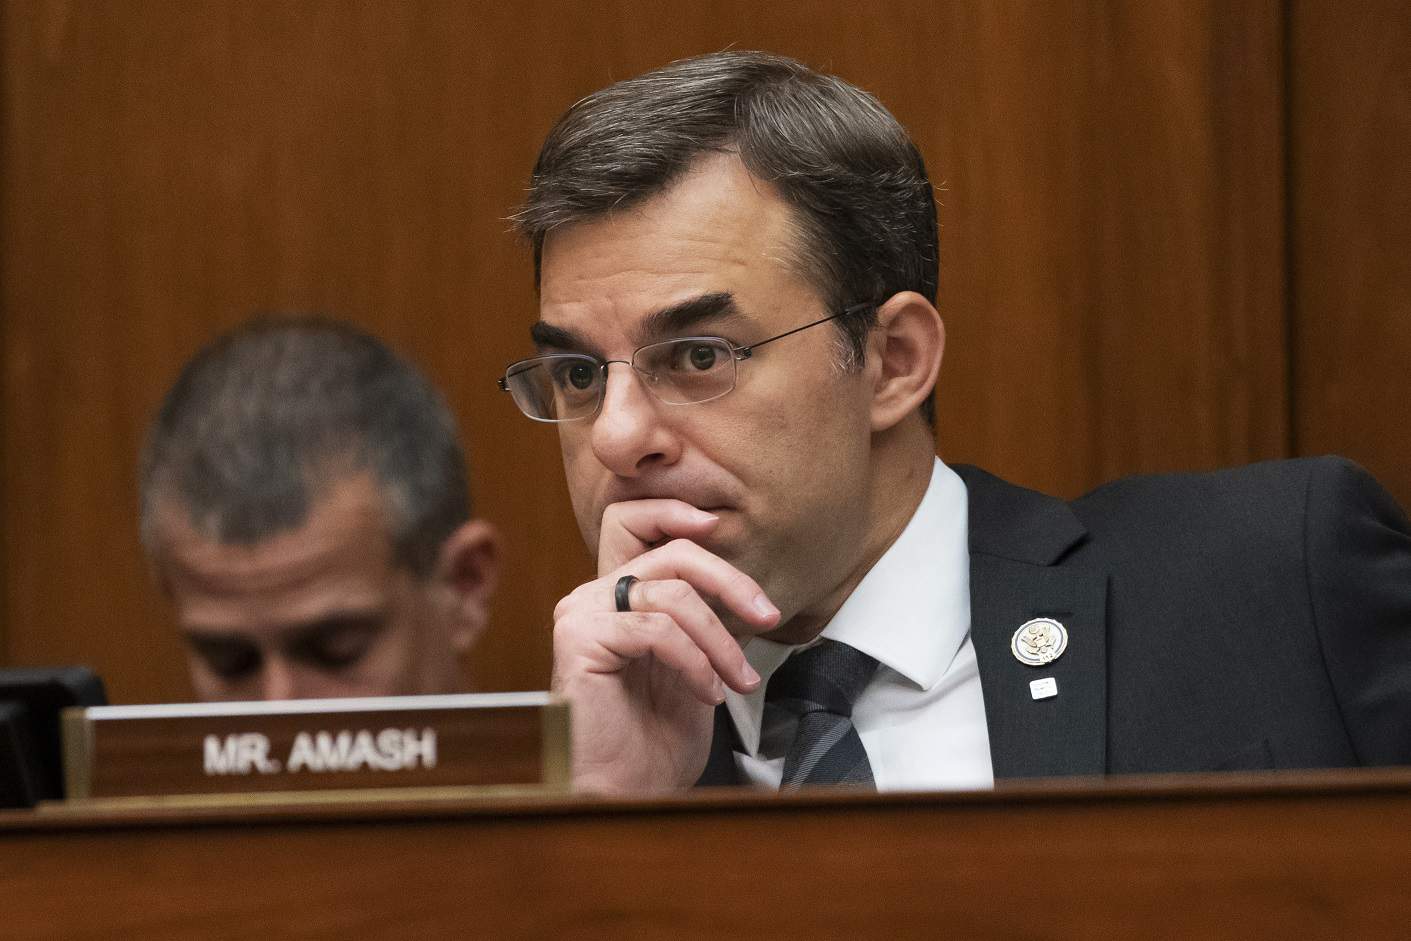 Justin Amash, the Libertarian looking to upend the 2020 election